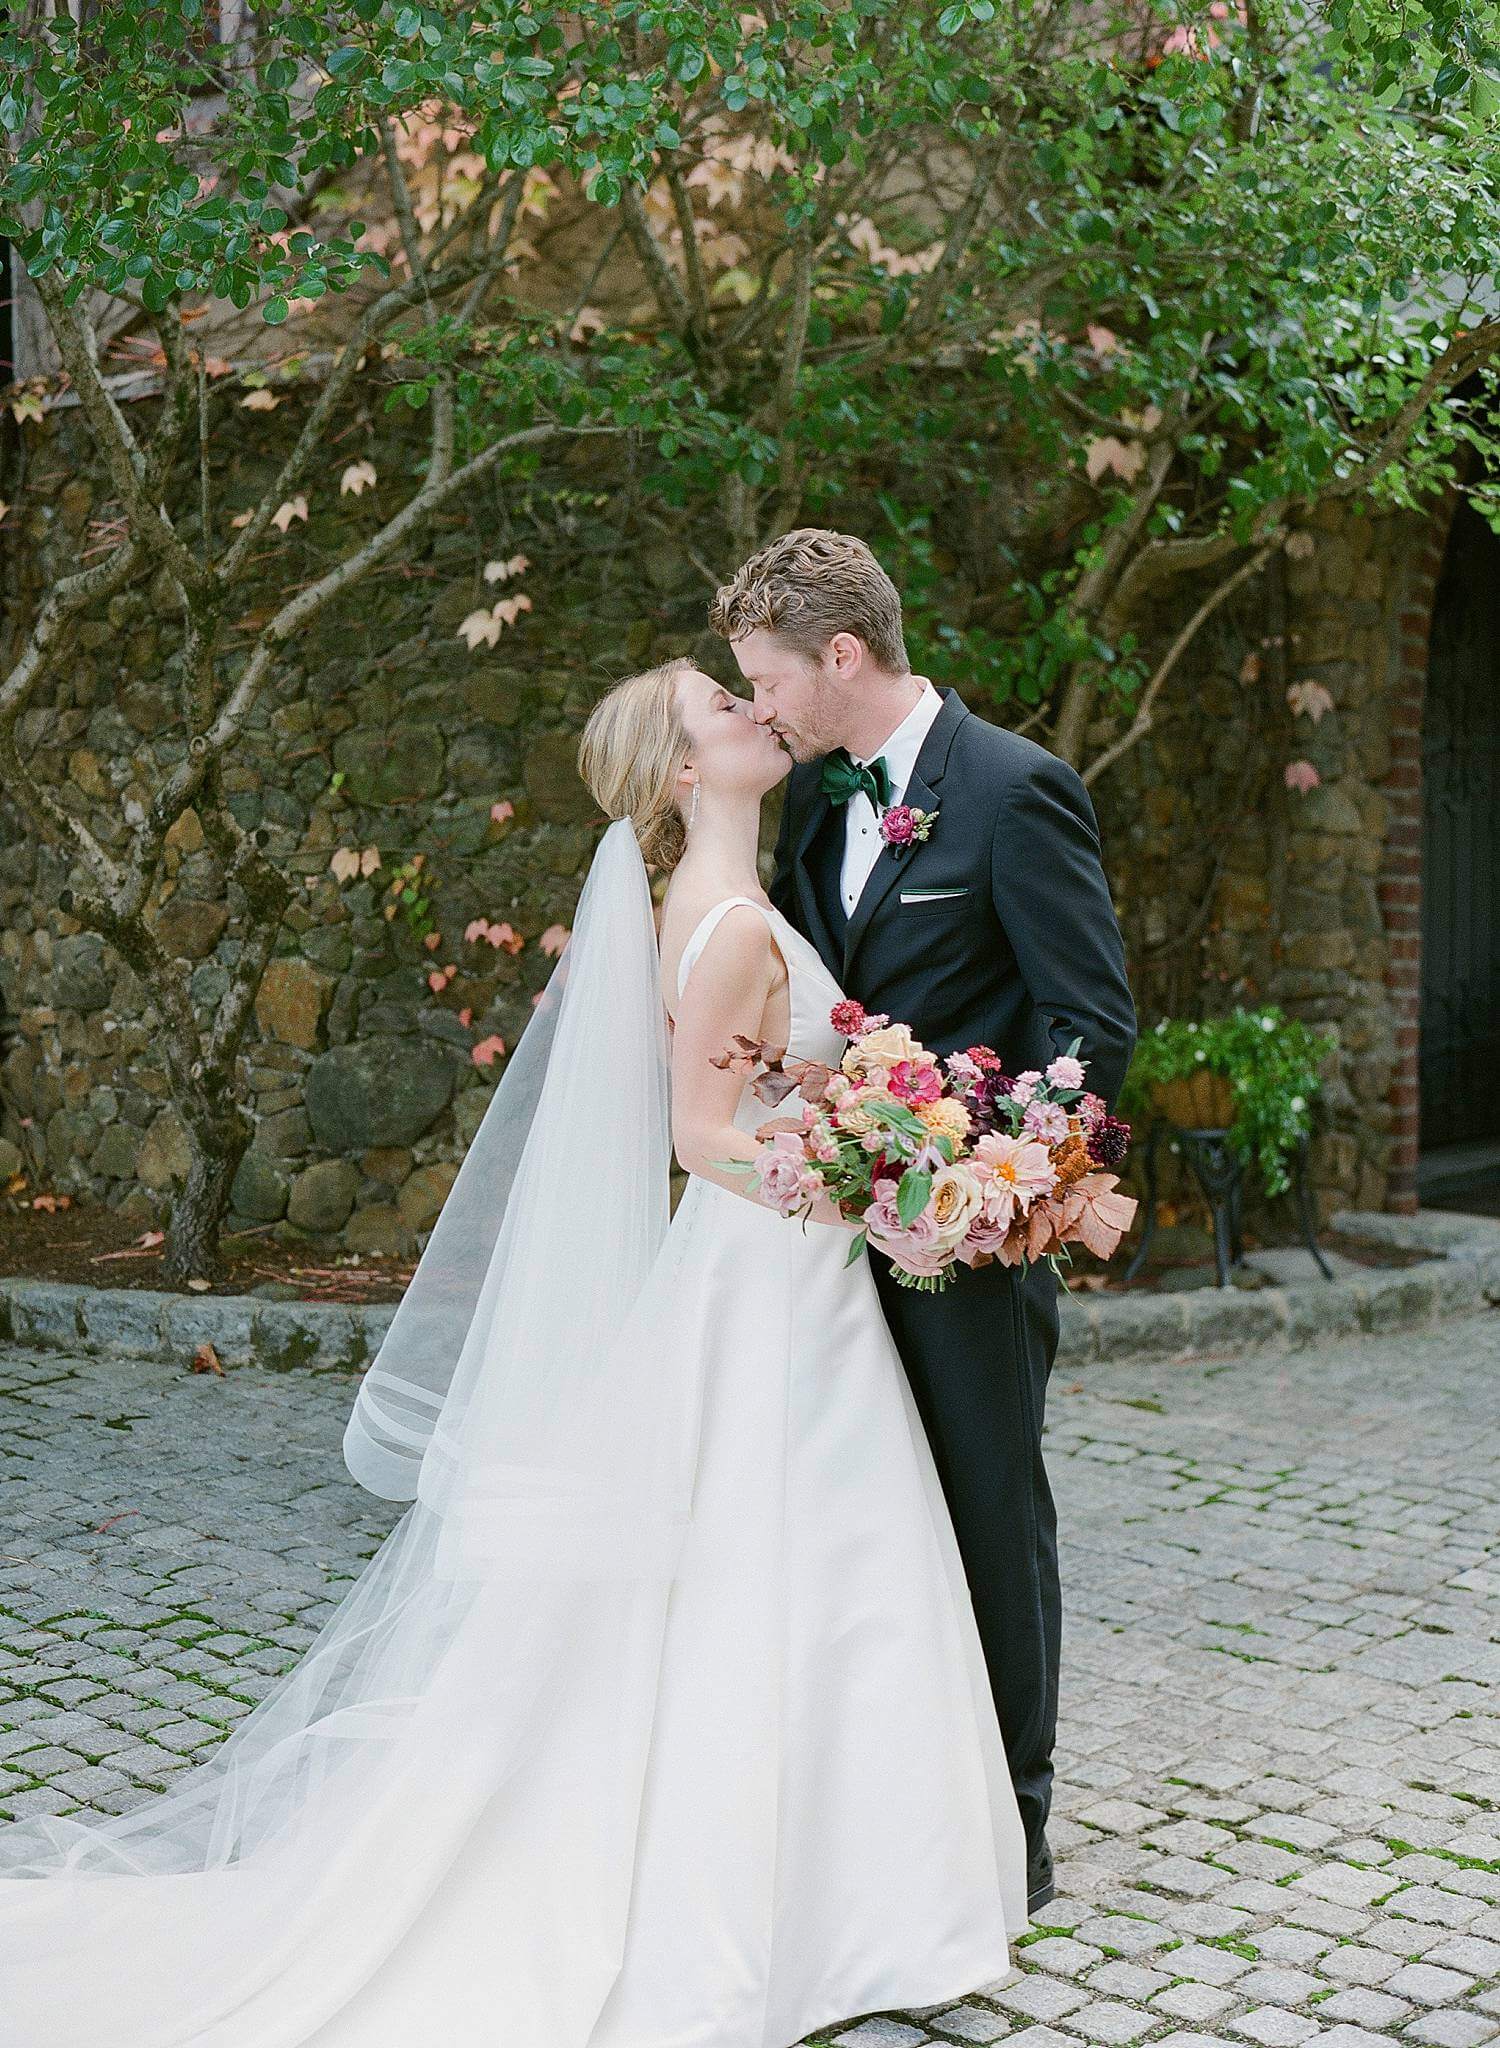 Bride & Groom's first look before their wedding at Dover Hall Estate